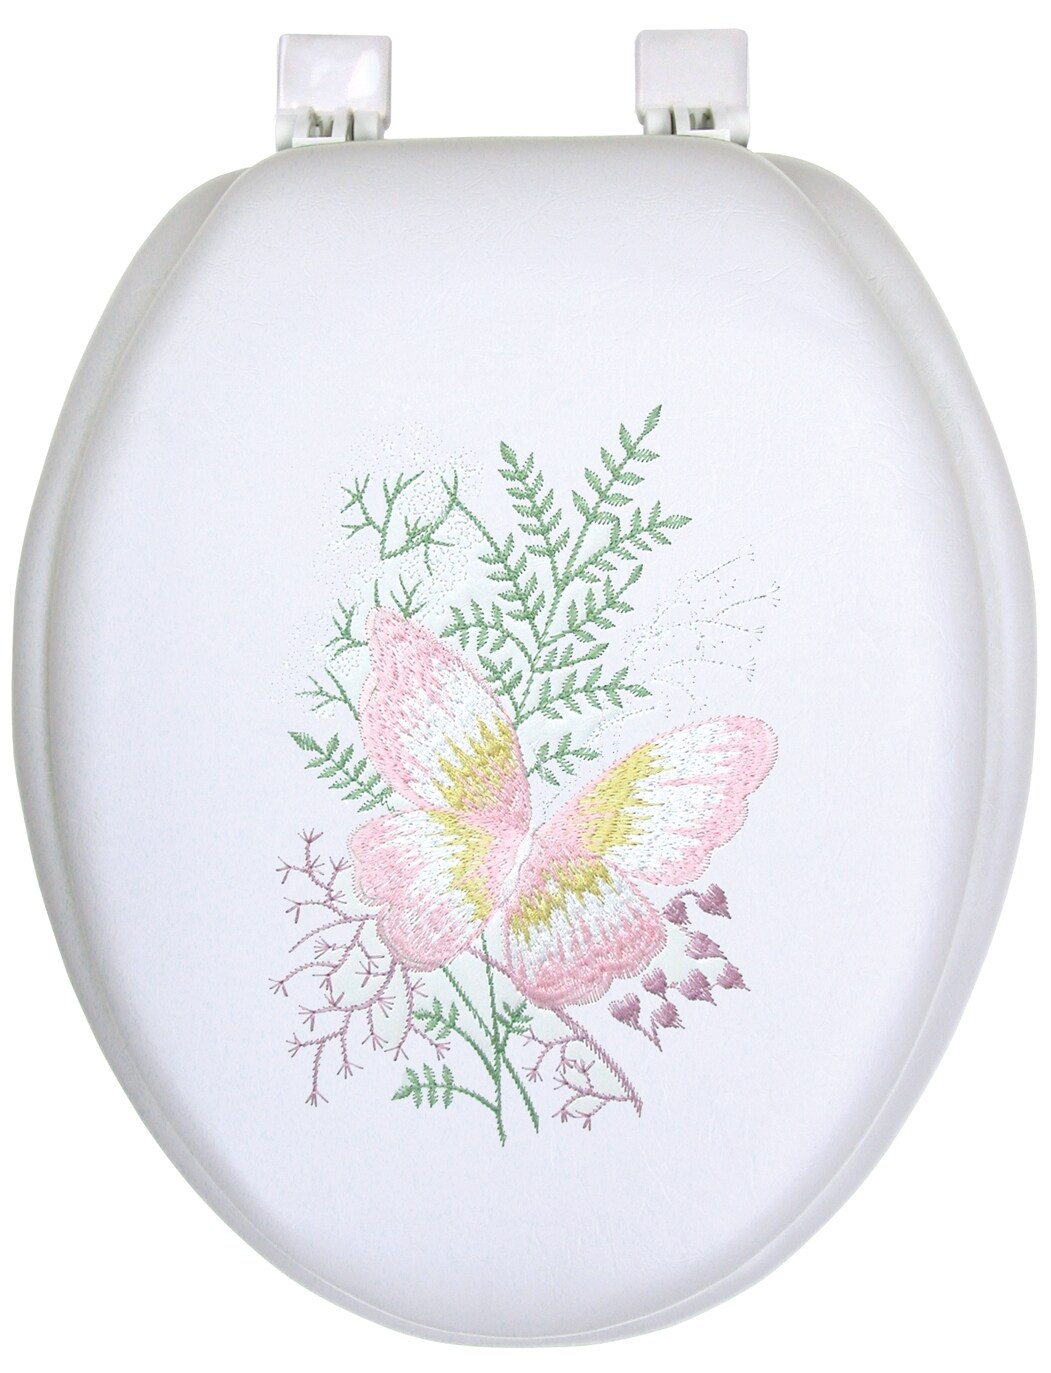 Soft Padded Cushioned Bathroom Toilet Seat Standard Round White Cover Elongated 